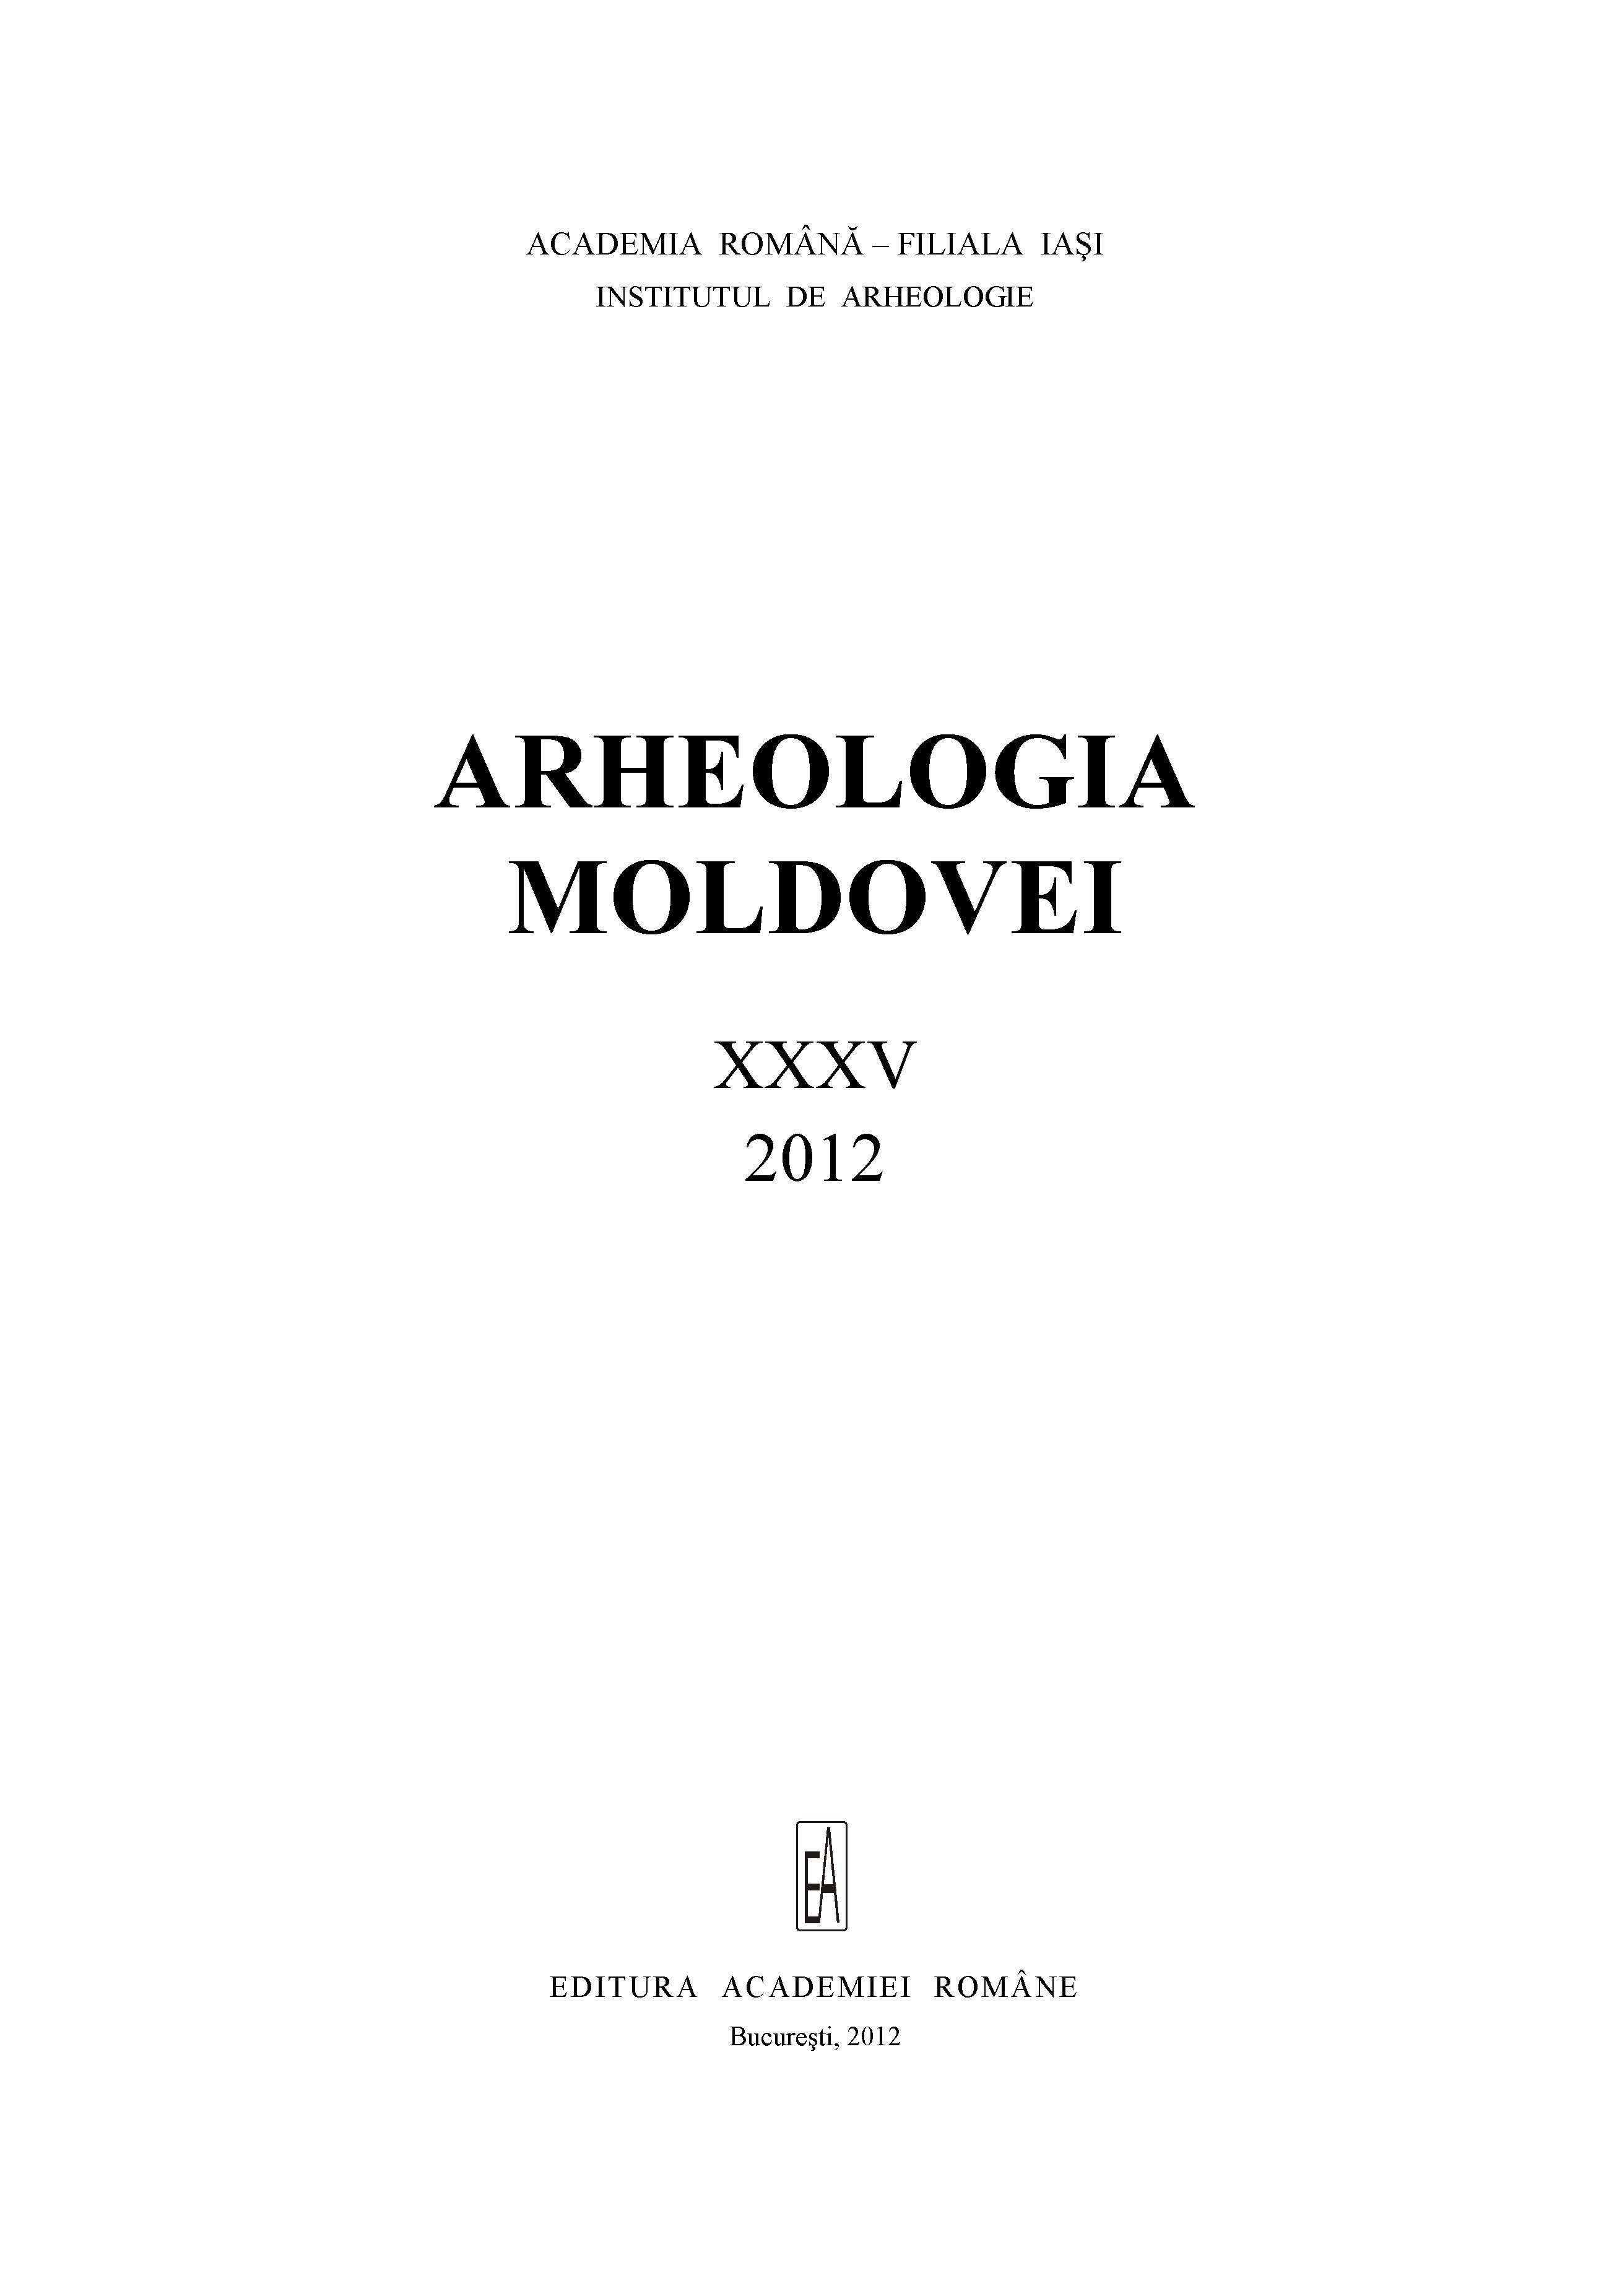 Osteological Analysis of the Tumular Cemetery of the 4th Century A.D. from Gura Secului – Nemţişor (Neamţ County, Romania) Cover Image